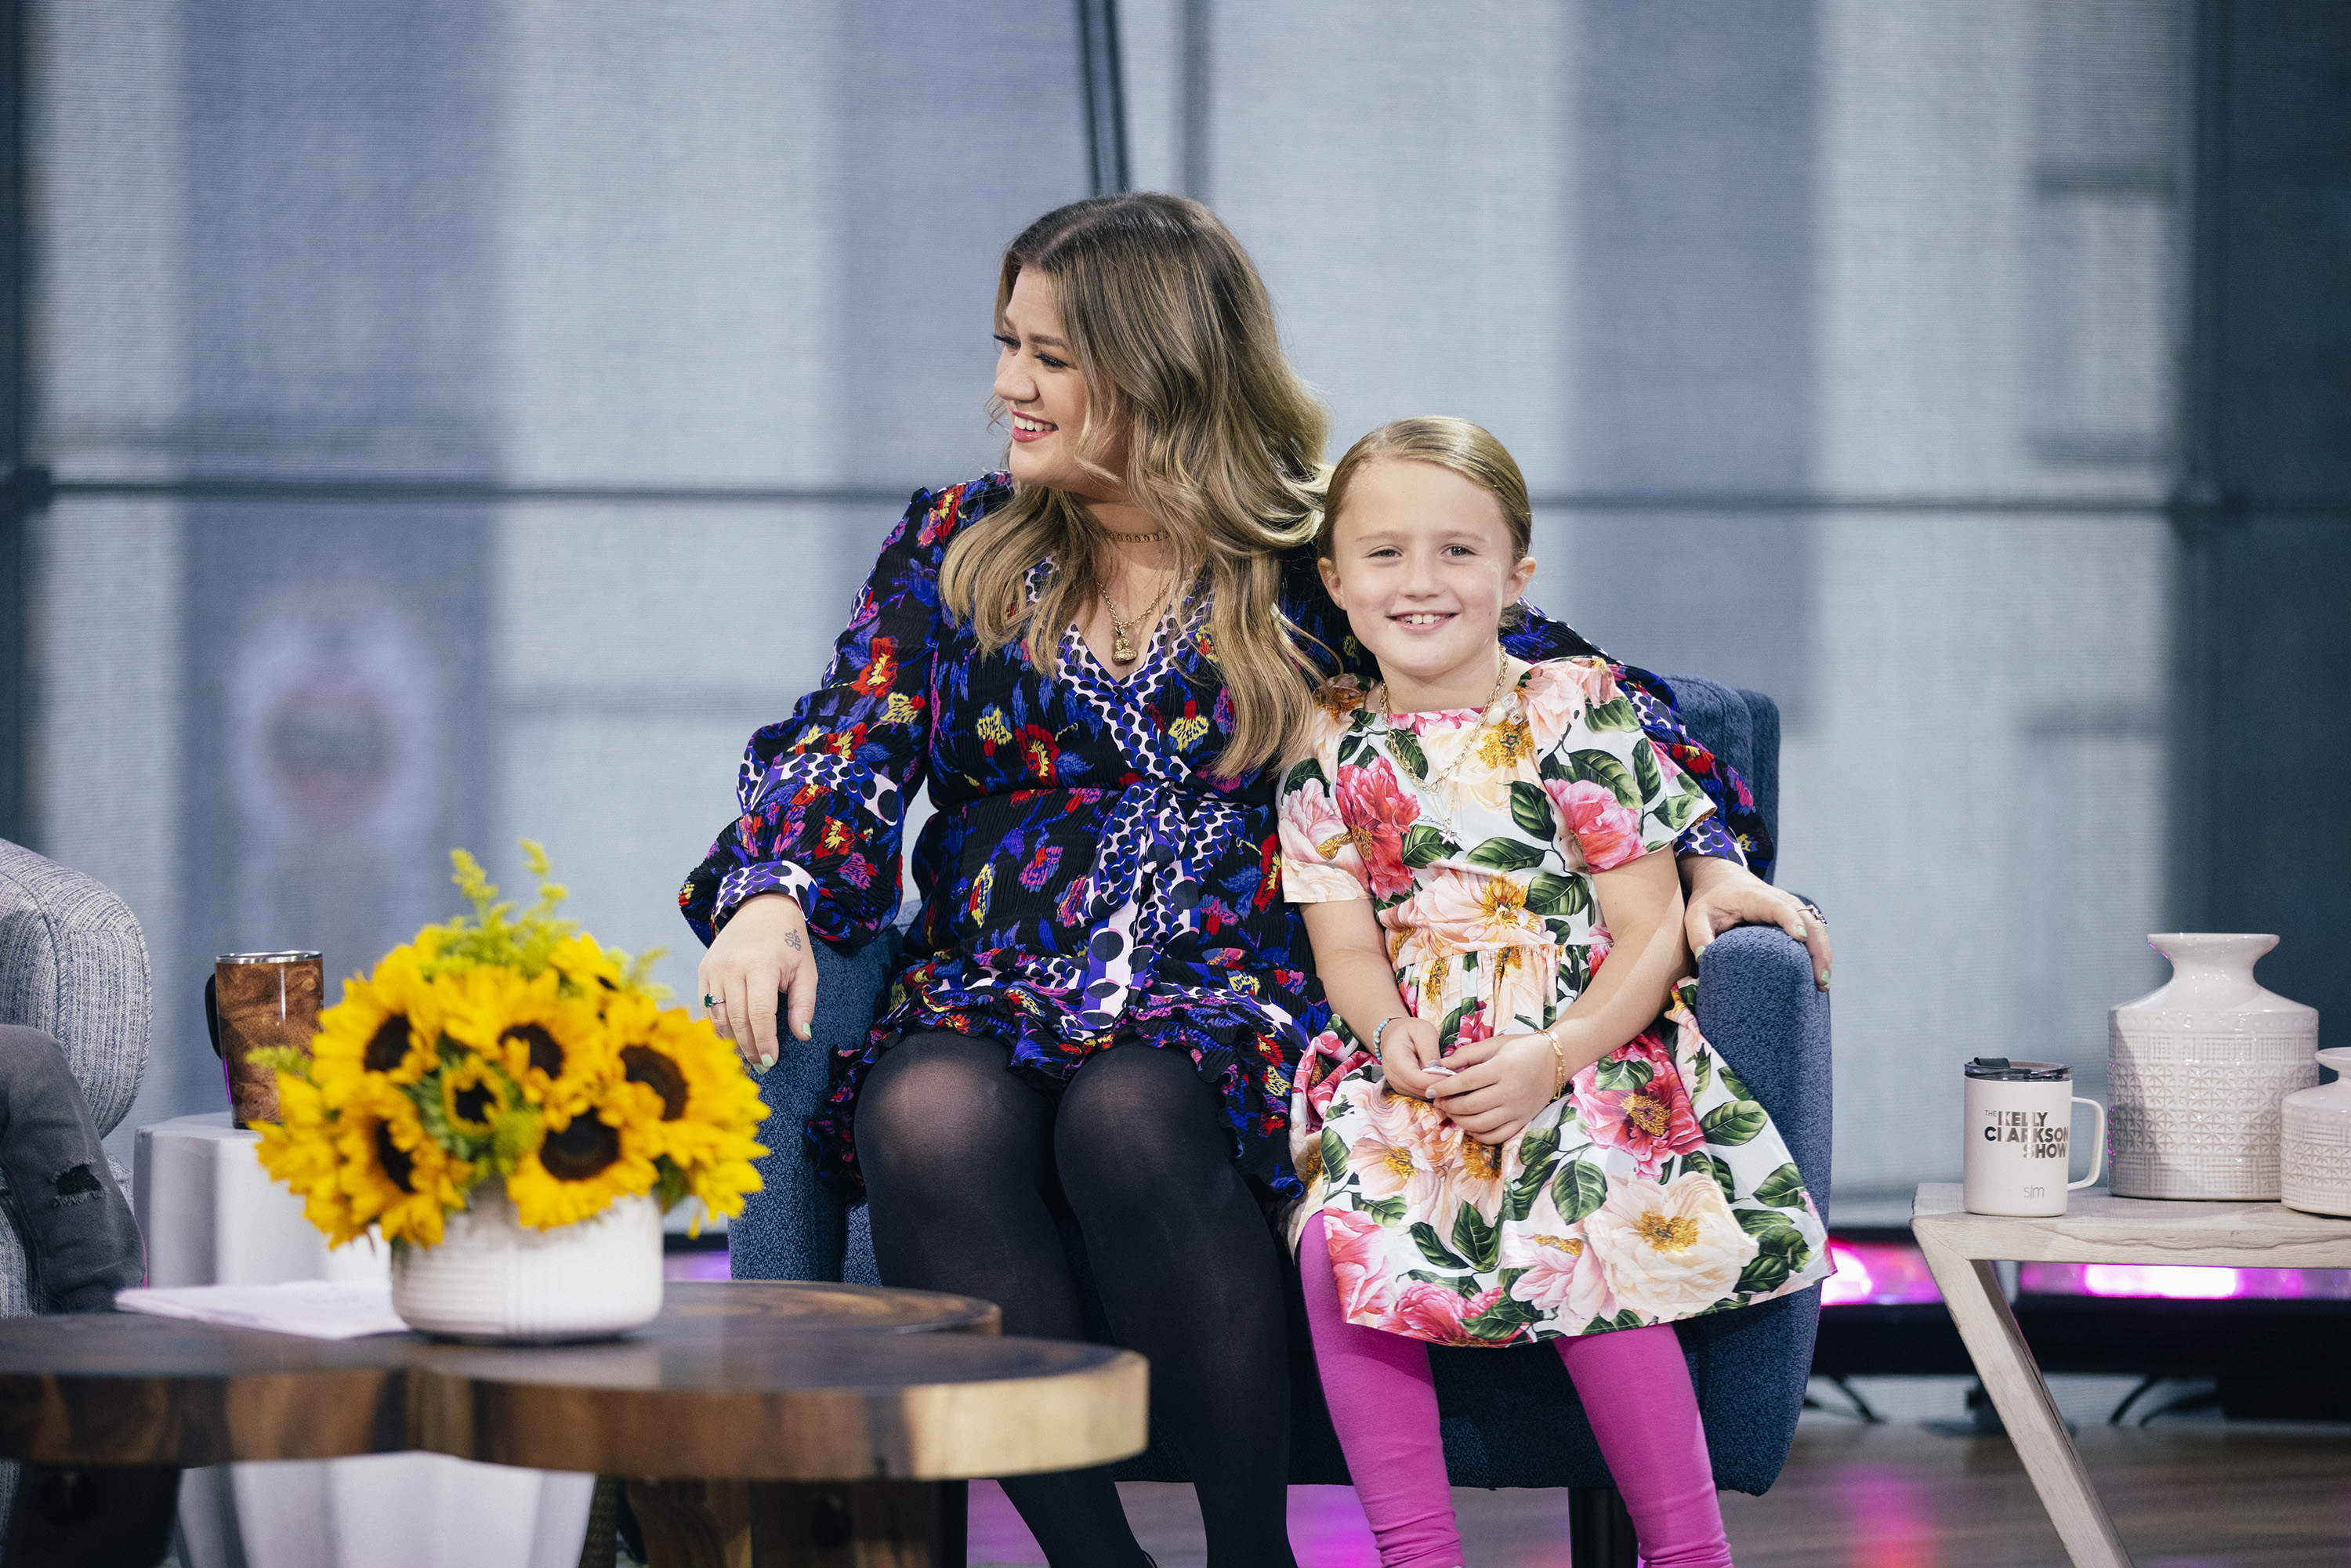 Kelly Clarkson on "The Kelly Clarkson Show" - Season 3 | Source: Getty Images